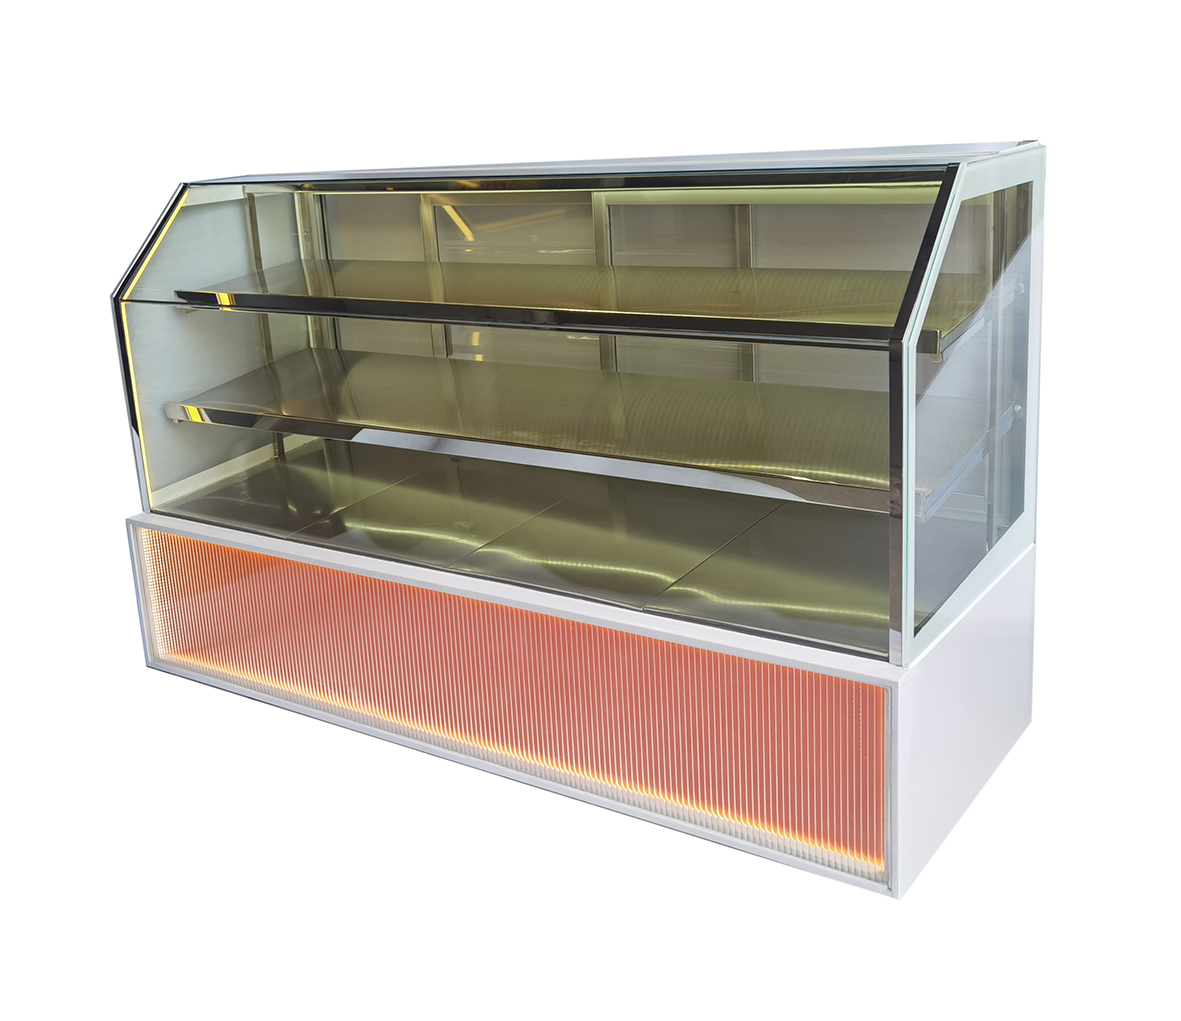 Pastry display cabinet at room temperatureXID-GDS